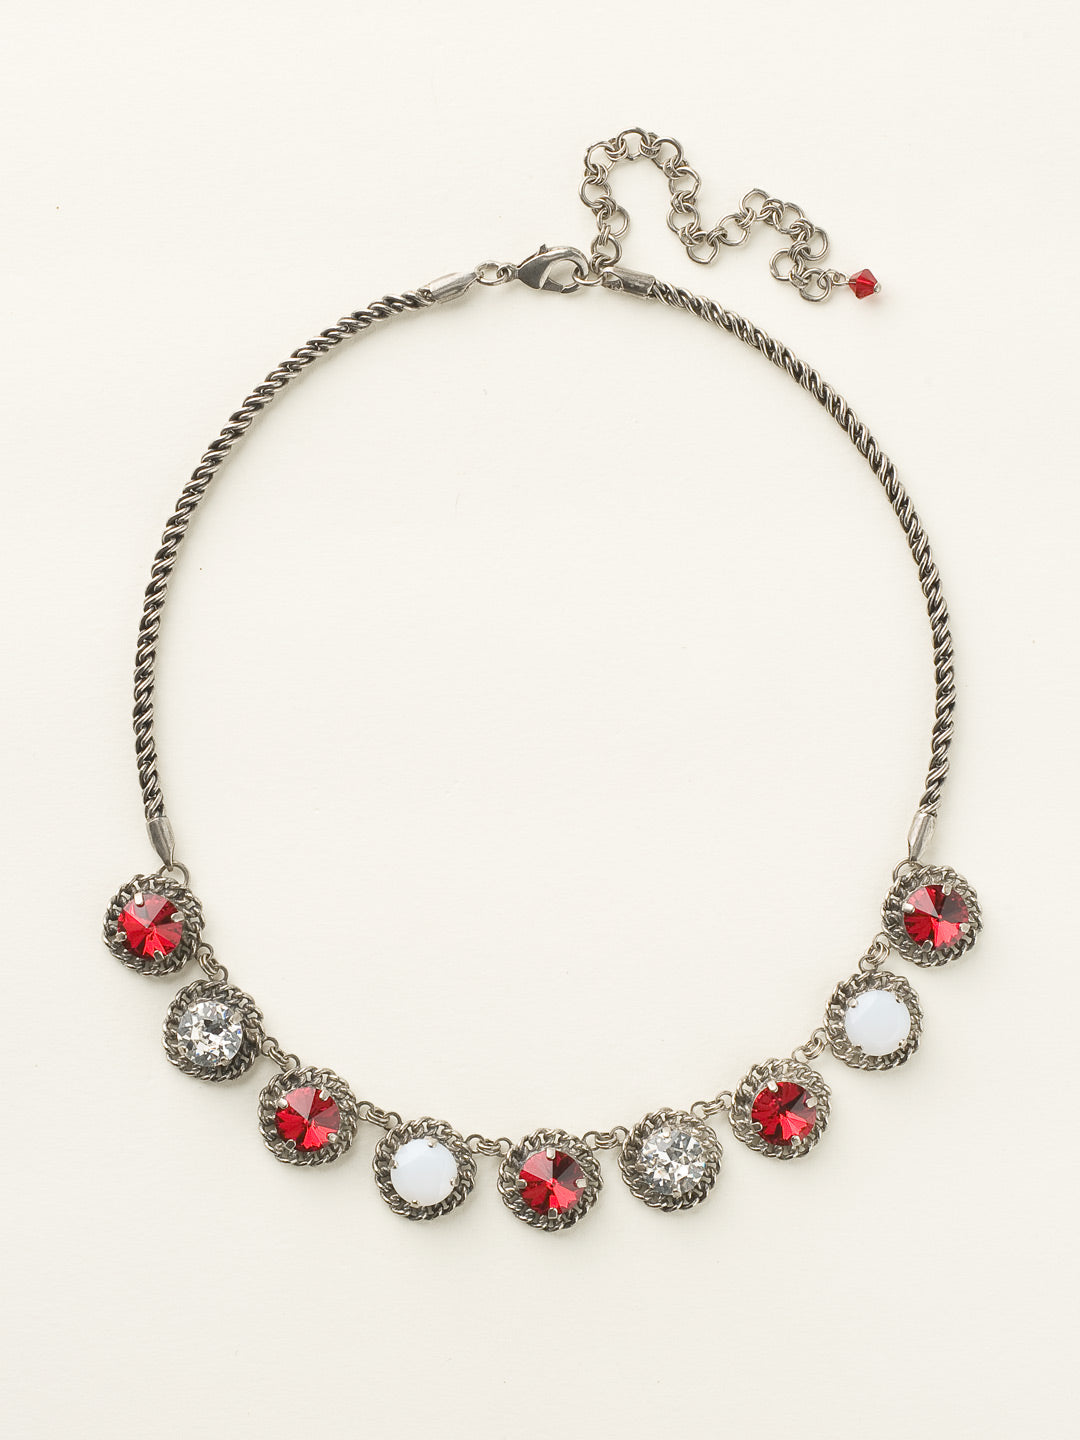 Roped In Statement Necklace - NCN1ASCP - <p>One strand and you'll be roped in. Go back to the basics with this necklace of crystals, in a vintage inspired setting that will add glamour to any look. From Sorrelli's Crimson Pride collection in our Antique Silver-tone finish.</p>